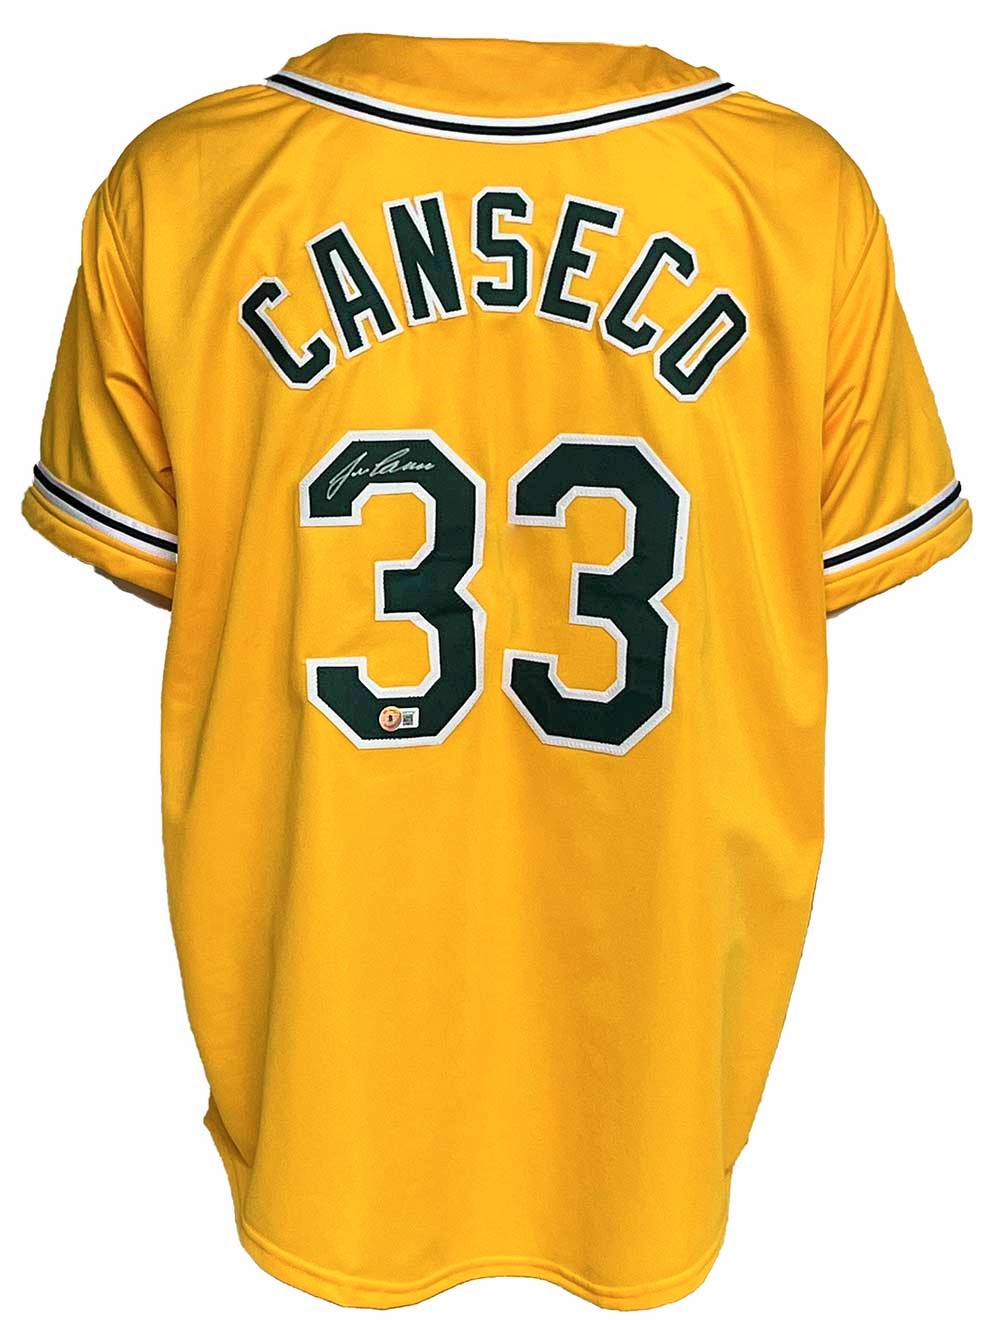 Jose Canseco SignedJuiced Autographed Jersey Jsa witnessed A's autograph  at 's Sports Collectibles Store